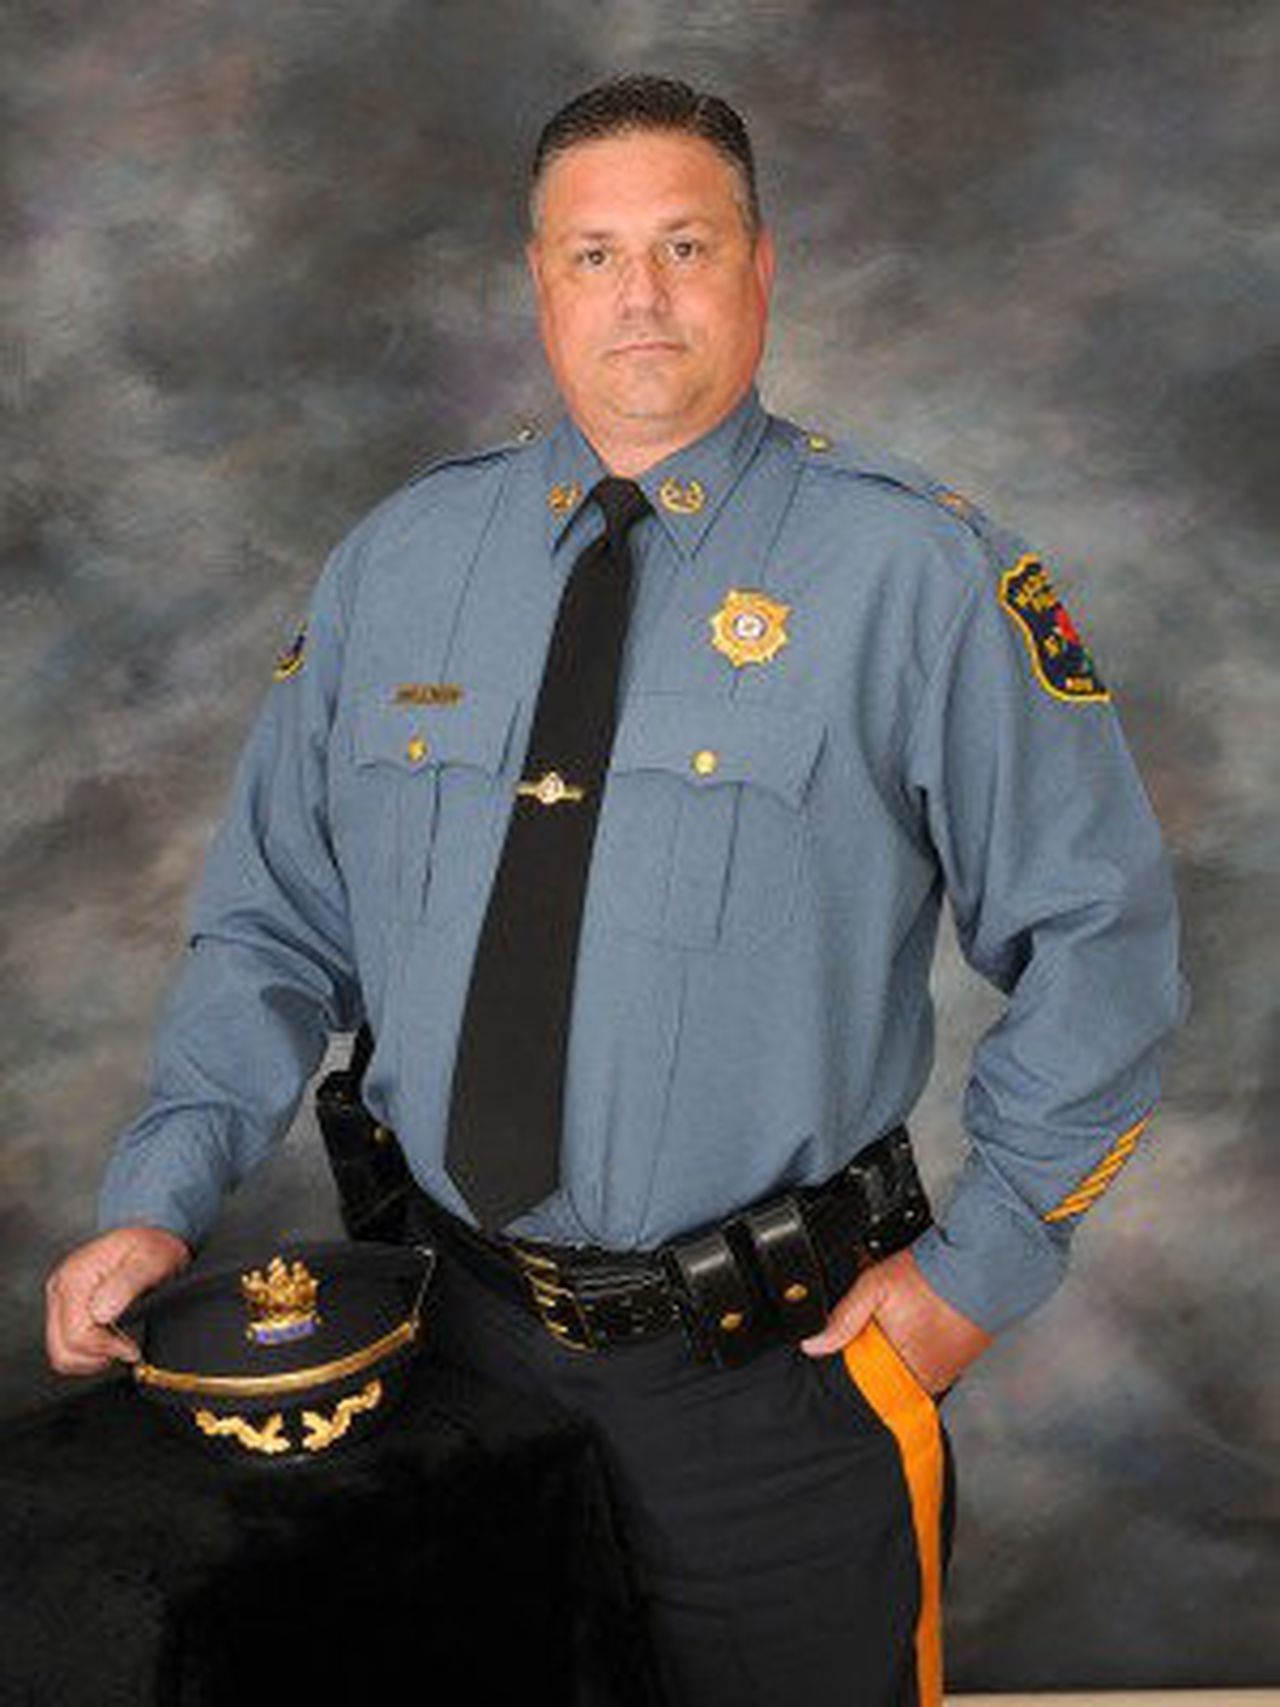 Madison Police Chief retires, effective immediately